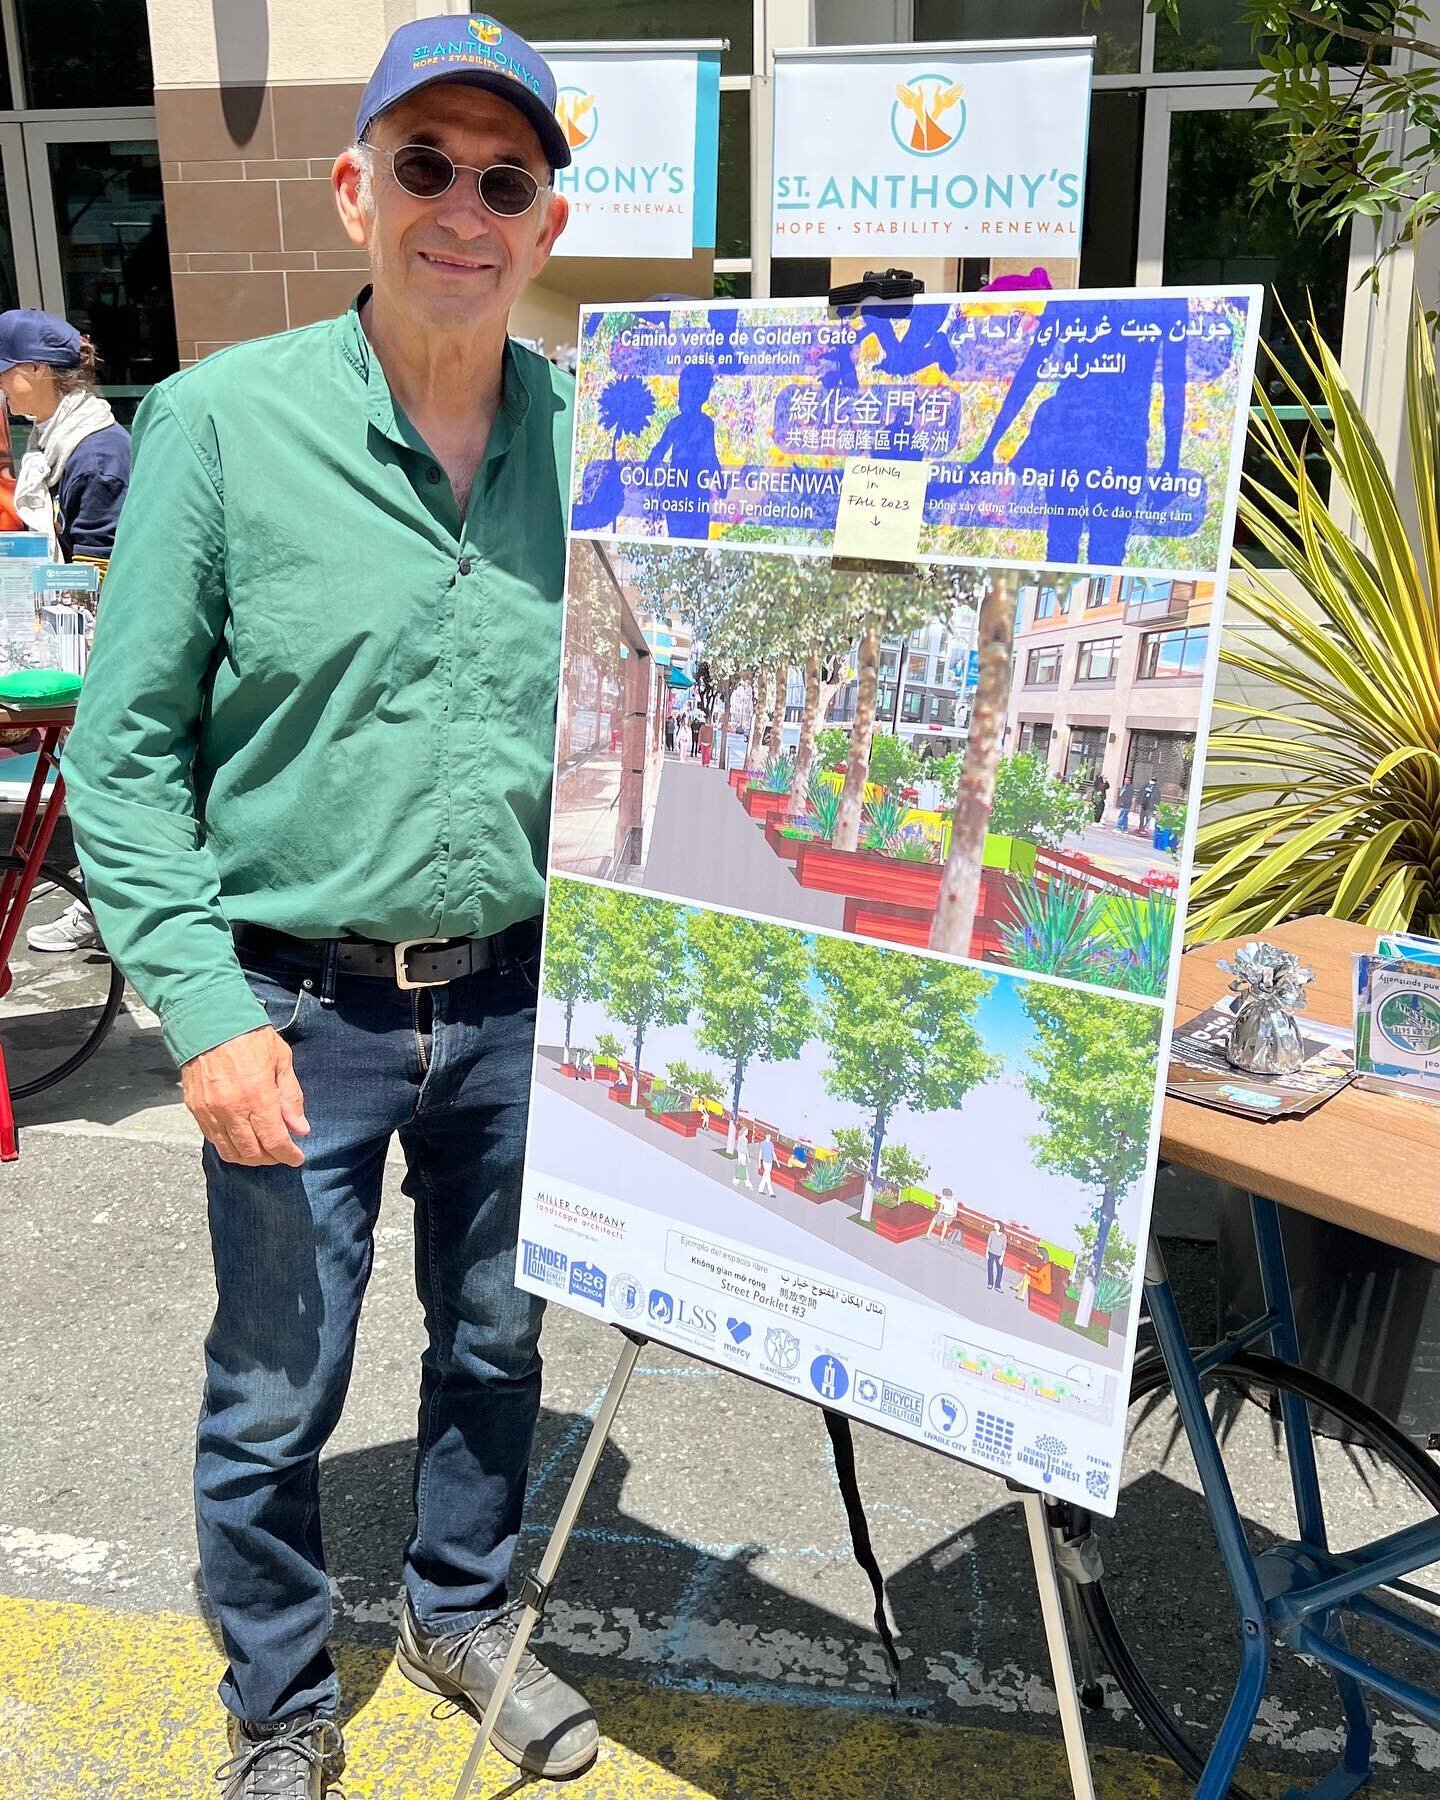 What a great turnout at Tenderloin&rsquo;s Sunday Streets this past weekend! We presented to the community our design for a new parklet at the corner of Golden Gate Ave. and Jones St. Lots of enthusiastic responses to the Golden Gate Greenway initiat